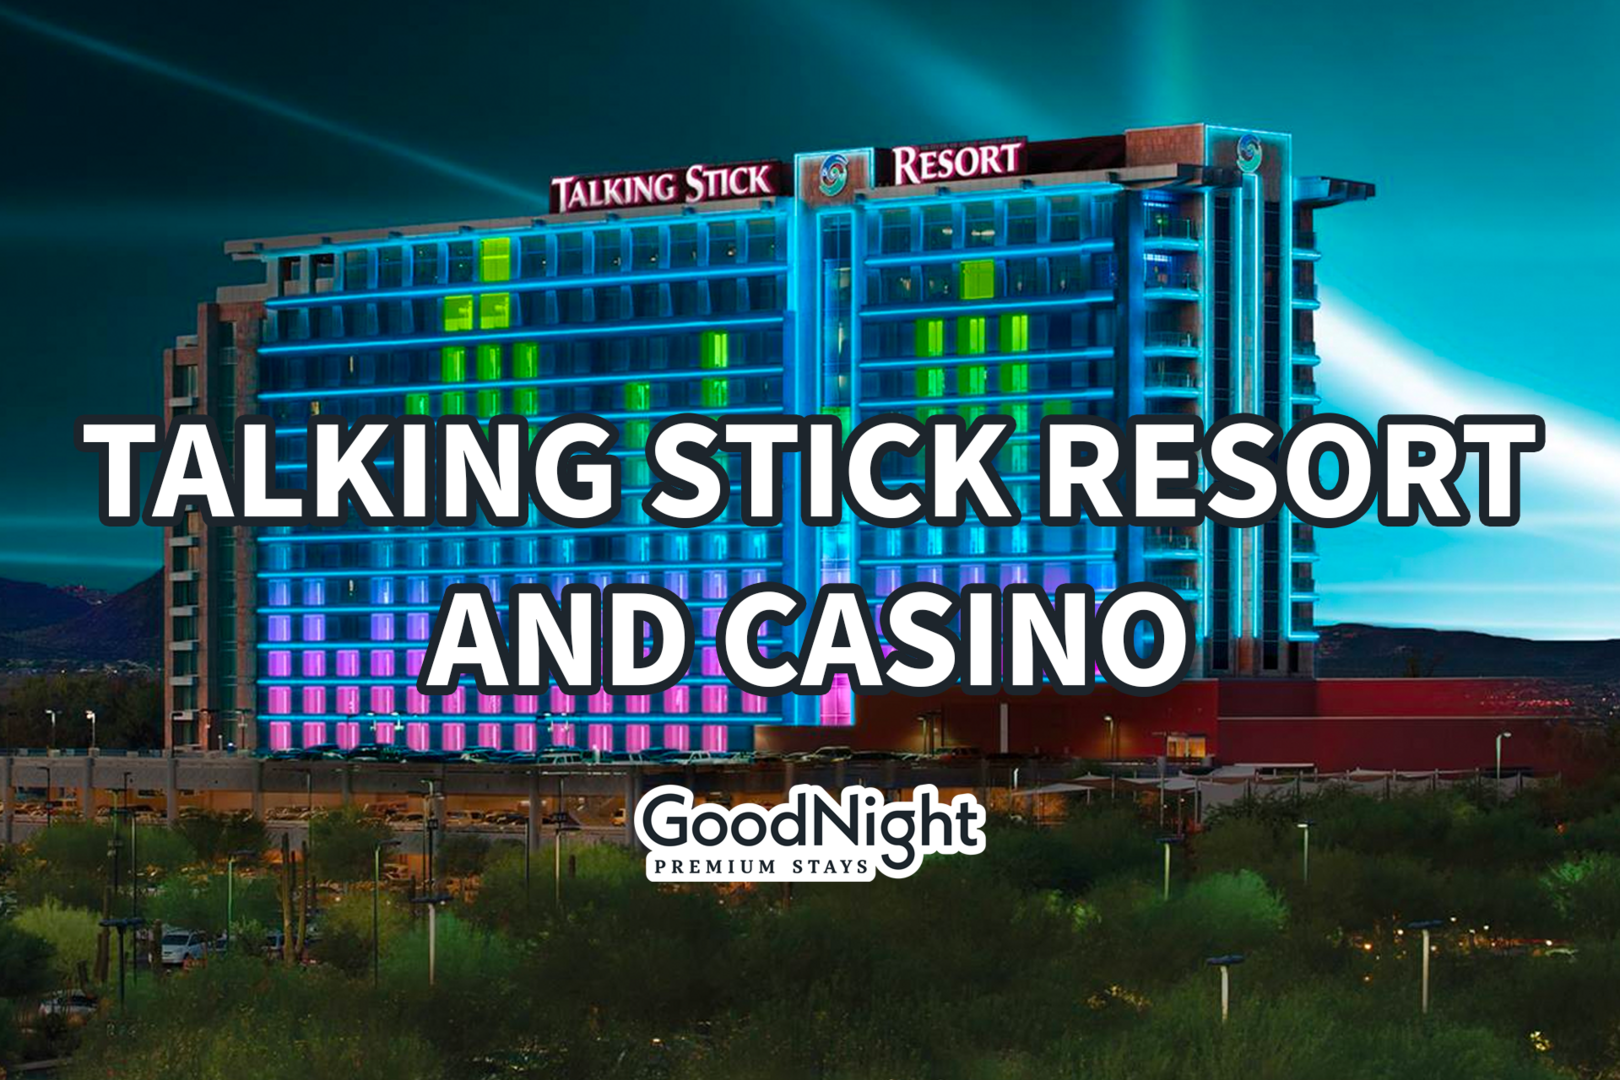 14 minutes to Talking Stick Resort and Casino